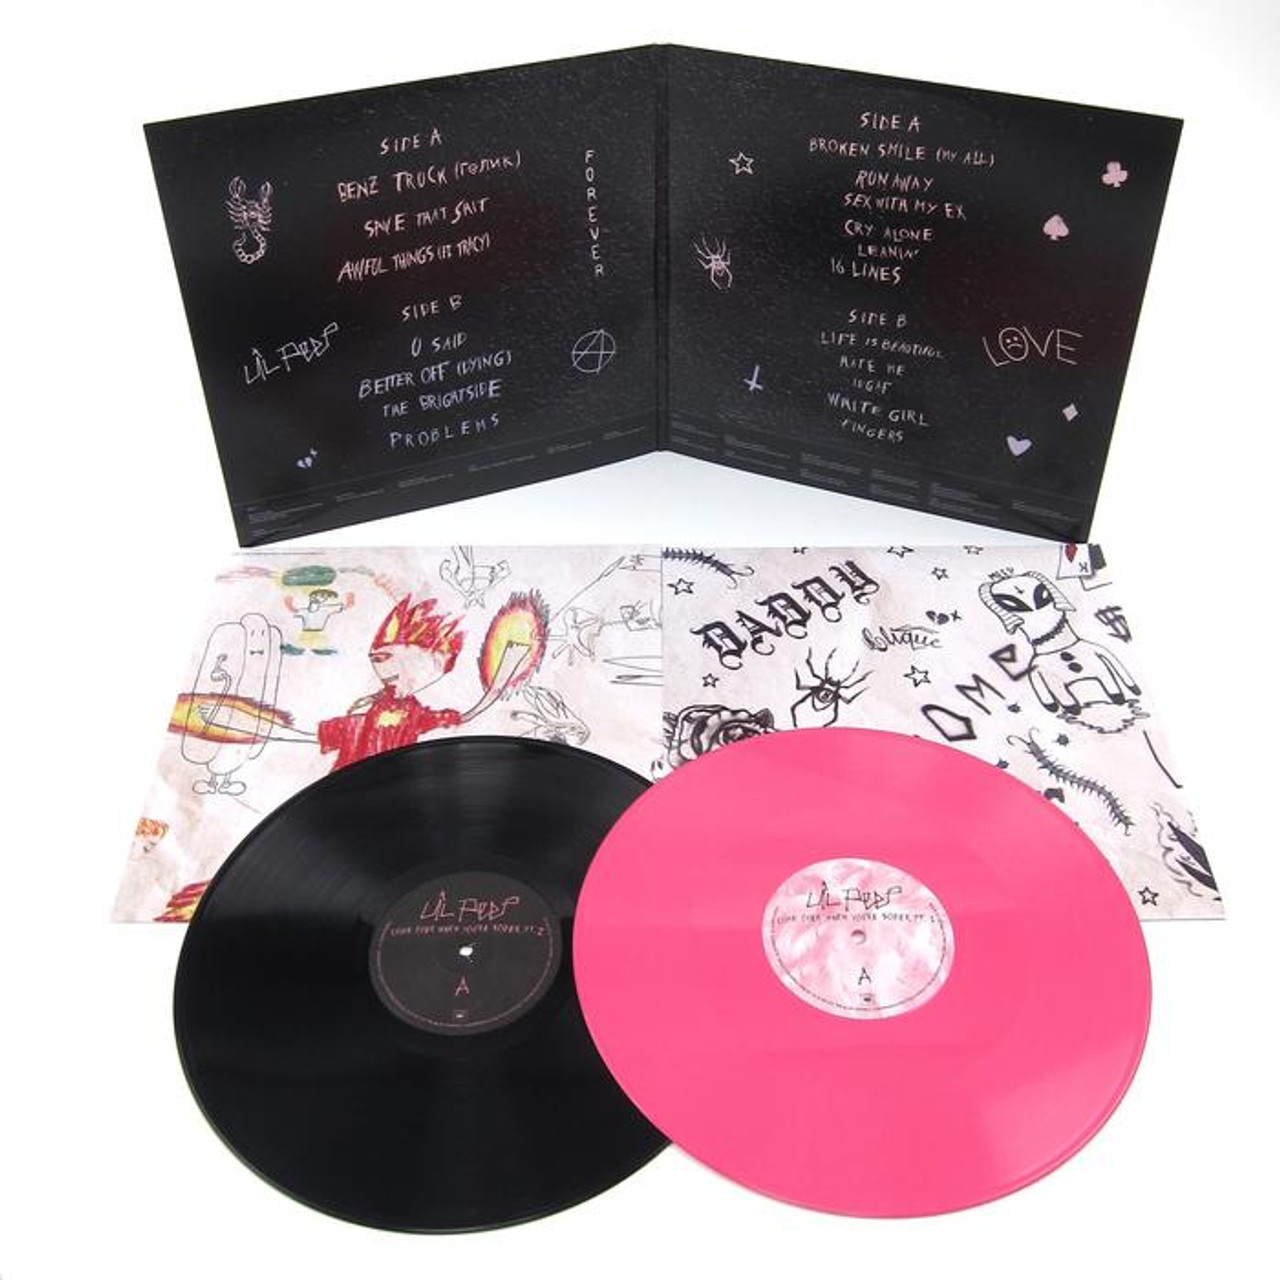 Lil Peep - Come over when you're sober (Pt 1 & Pt 2 Pink and Black Vinyl)